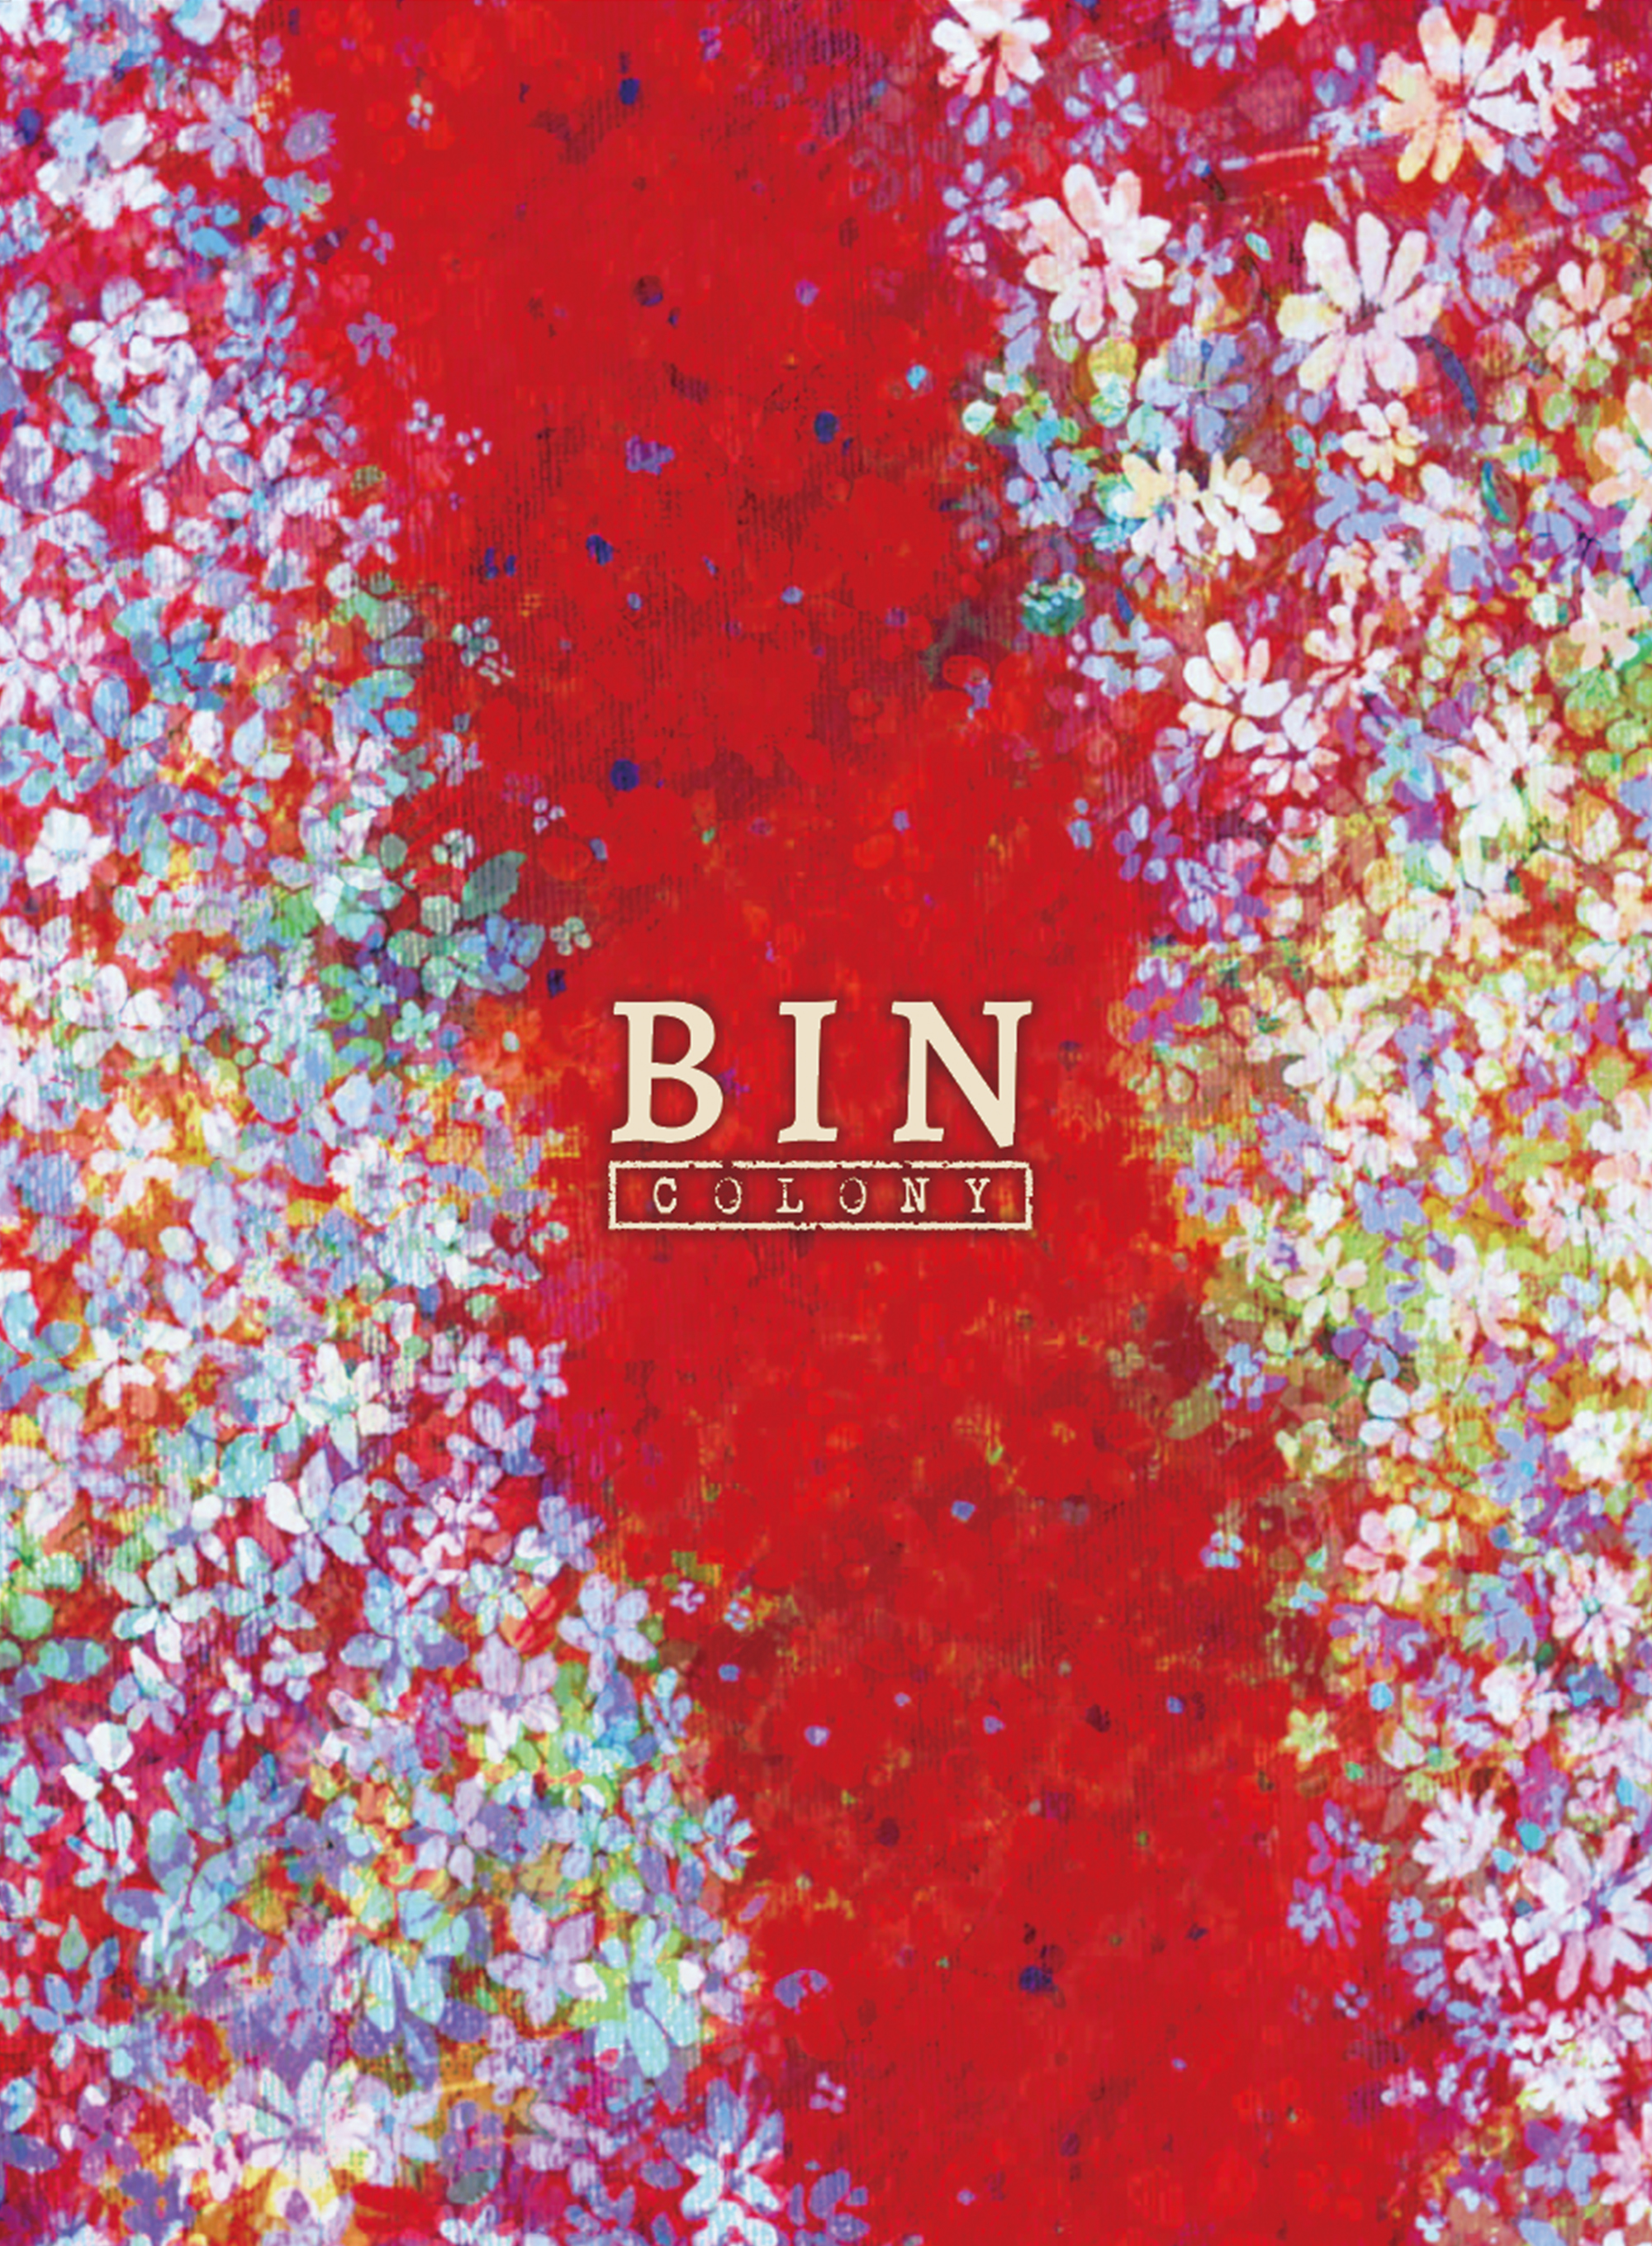 BIN 1st Album "COLONY" Limited Edition (CD+Booklet with illustrations by Tomato) Release on March 24th 2021